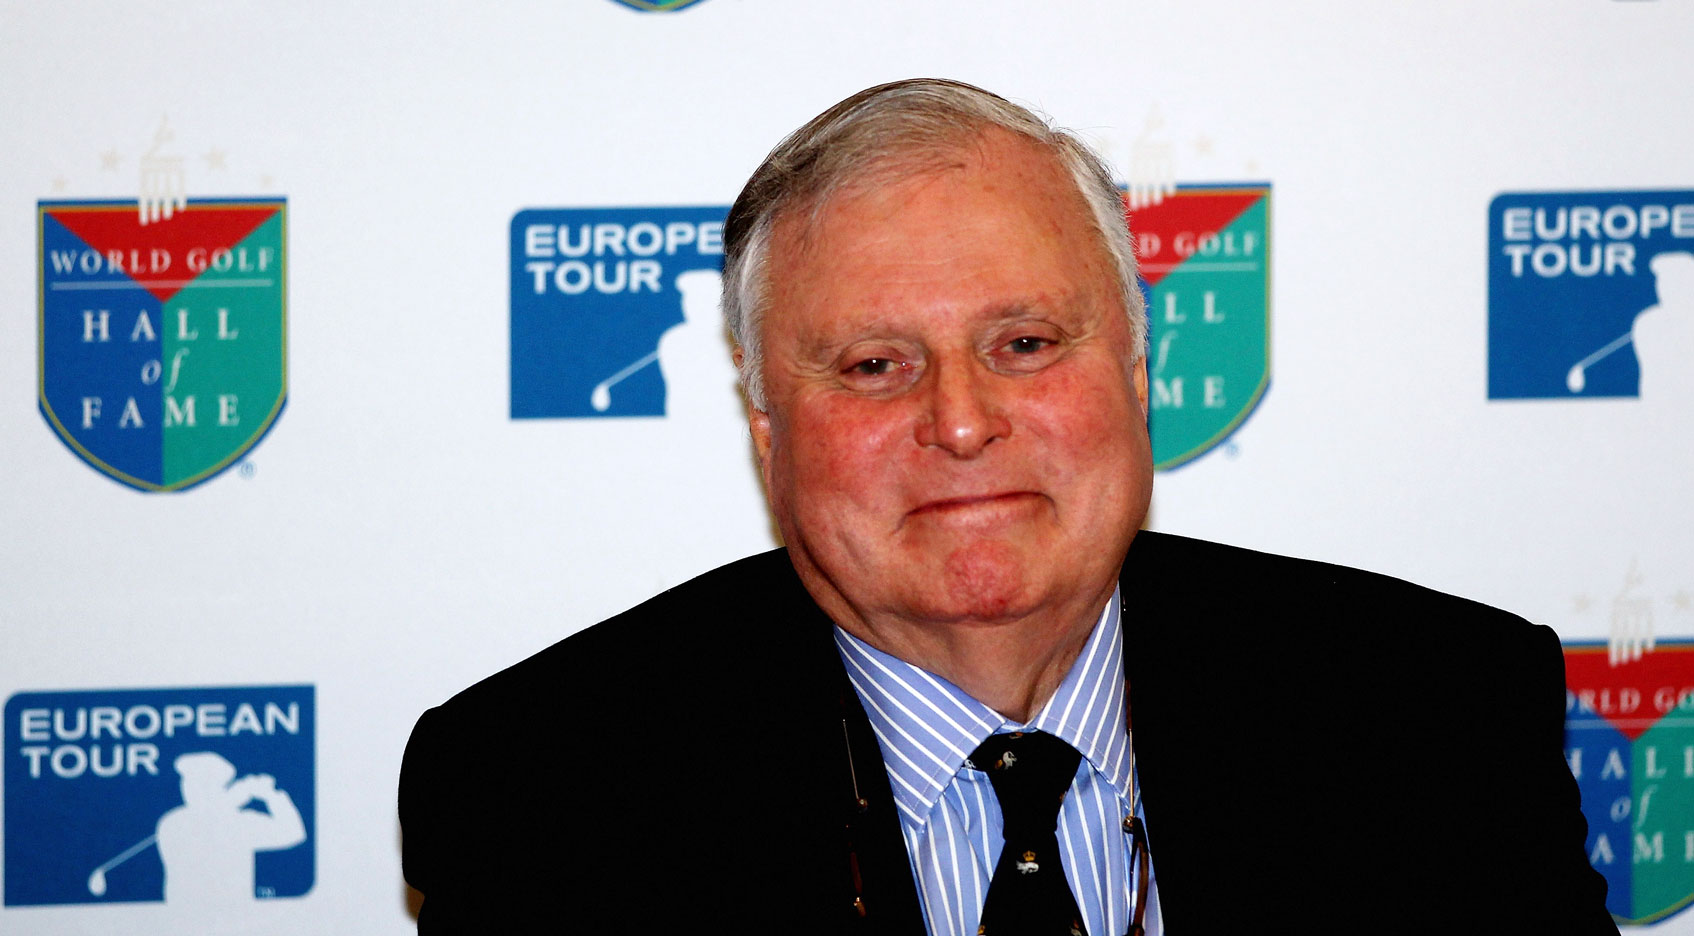 Peter Alliss, the ‘Voice of Golf’ on British TV, passes away at 89